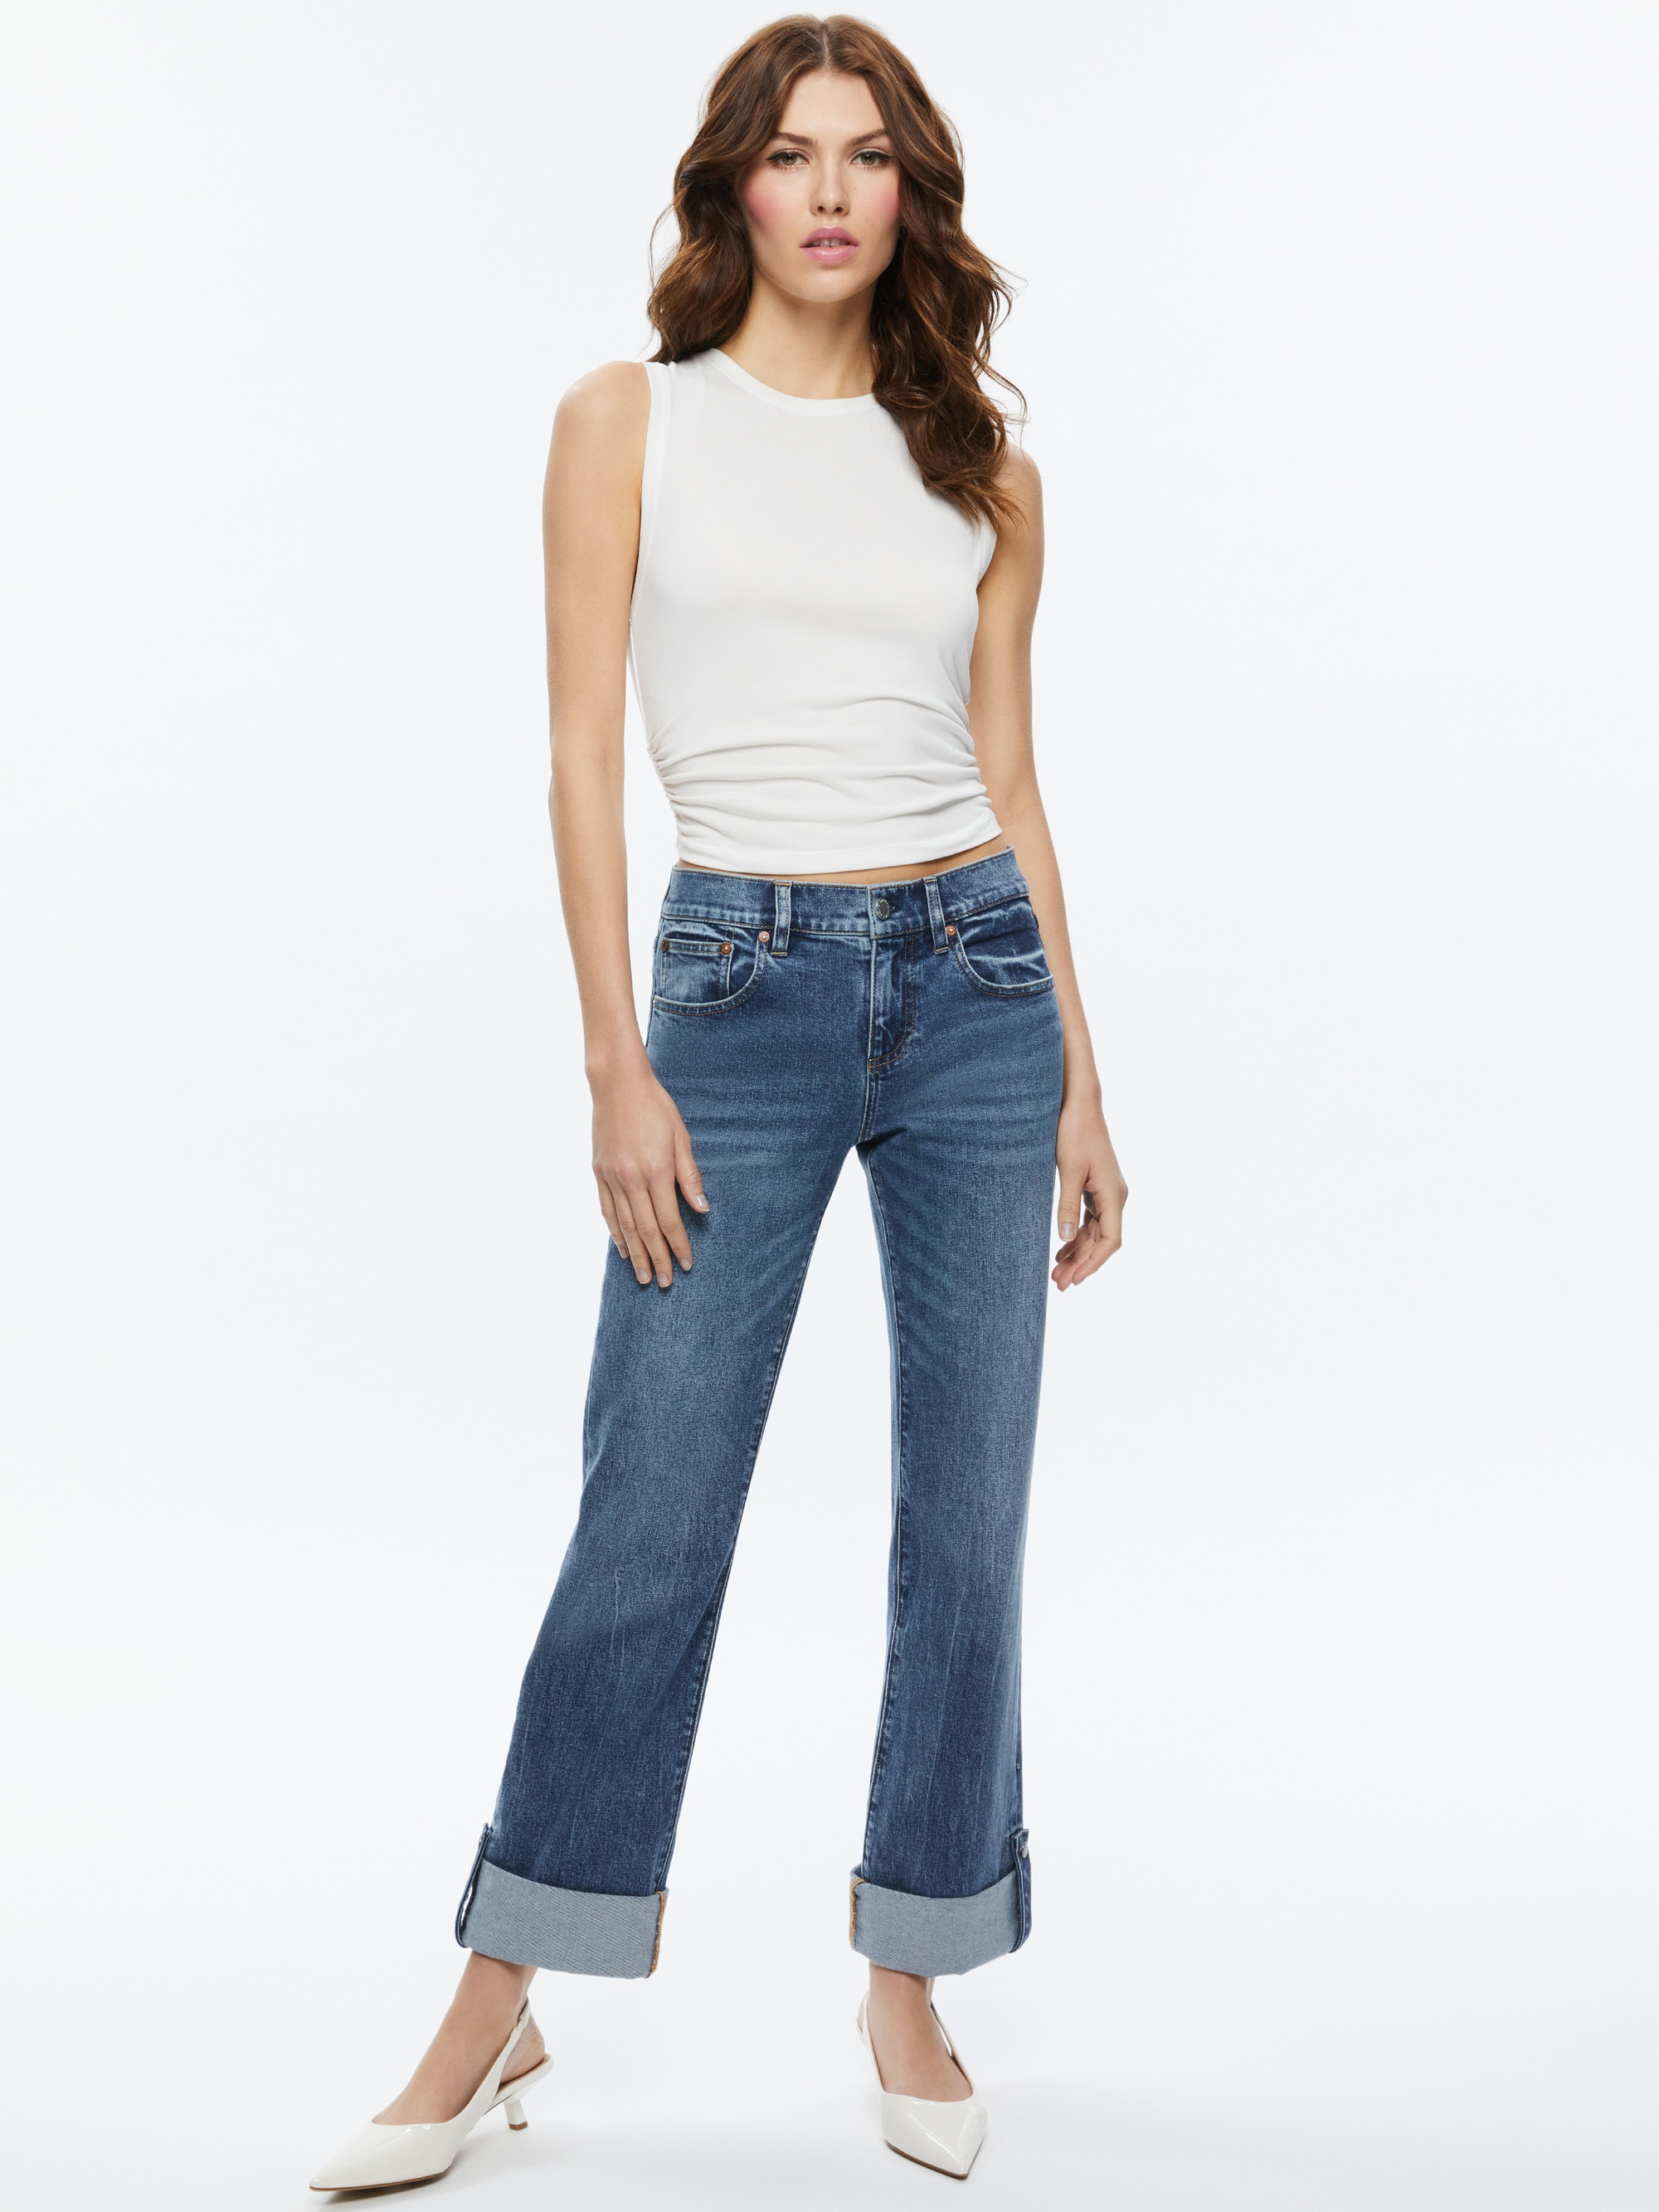 ABILENE LOW RISE CUFFED JEAN WITH SNAPS - 3